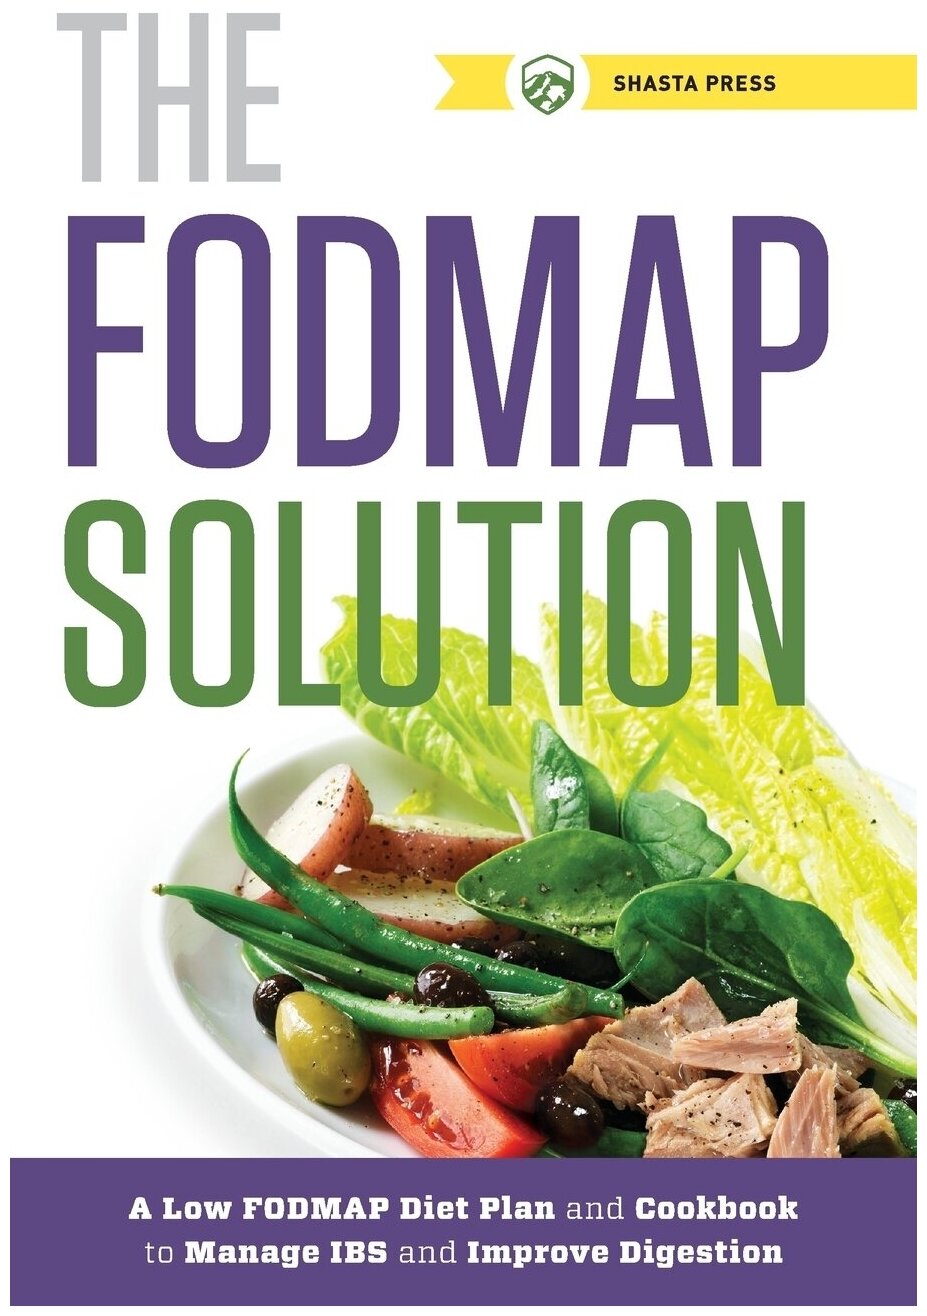 Fodmap Solution. A Low Fodmap Diet Plan and Cookbook to Manage IBS and Improve Digestion